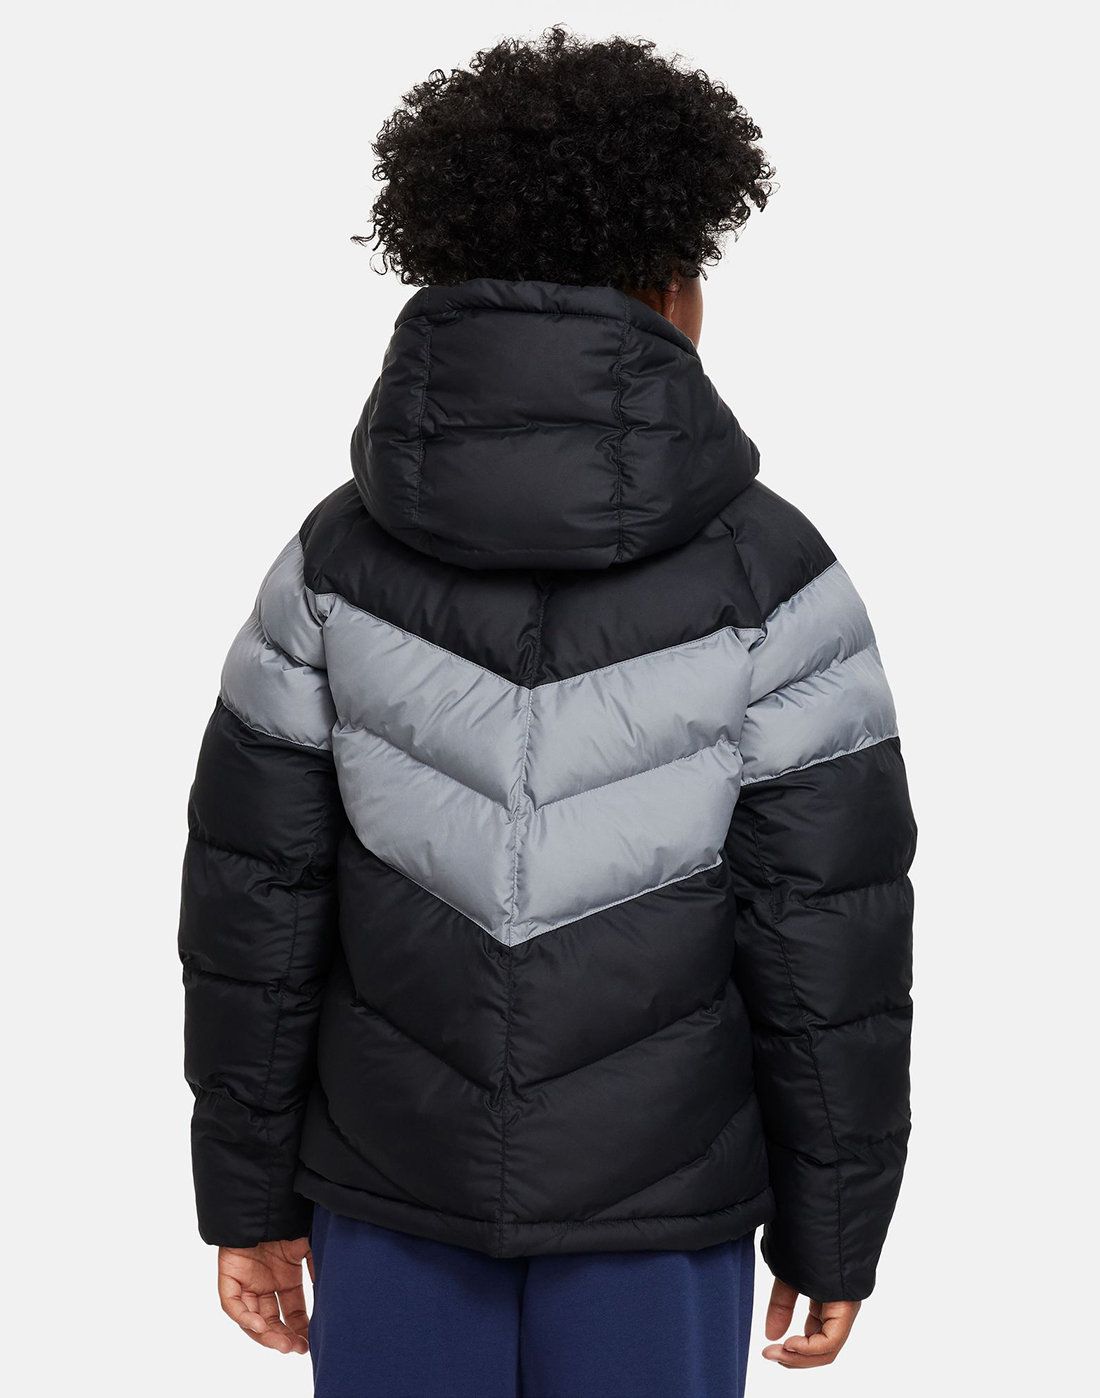 Nike Older Kids Synthetic Fill Jacket - Black | Life Style Sports IE